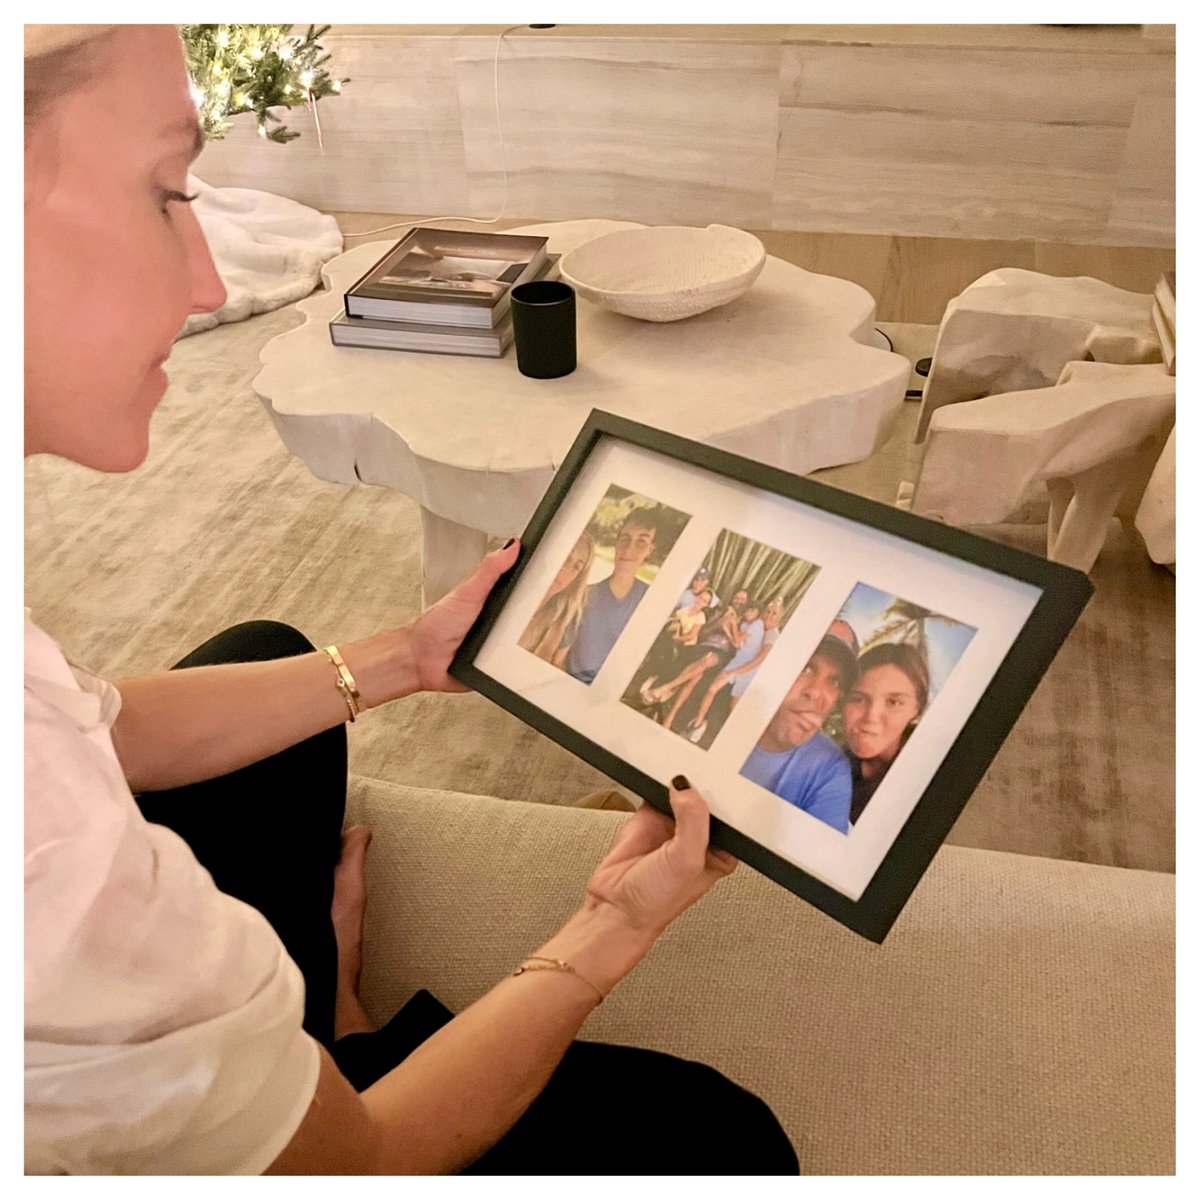 The holiday season is the perfect time to reflect on all of the special moments this year had to offer🥰 The @CanonCanada MegaTank Refillable Printer can print up to 2,000 4x6 photos so I can print without worrying about ink! Learn more! bit.ly/3HKddcV #ad #CanonPartner